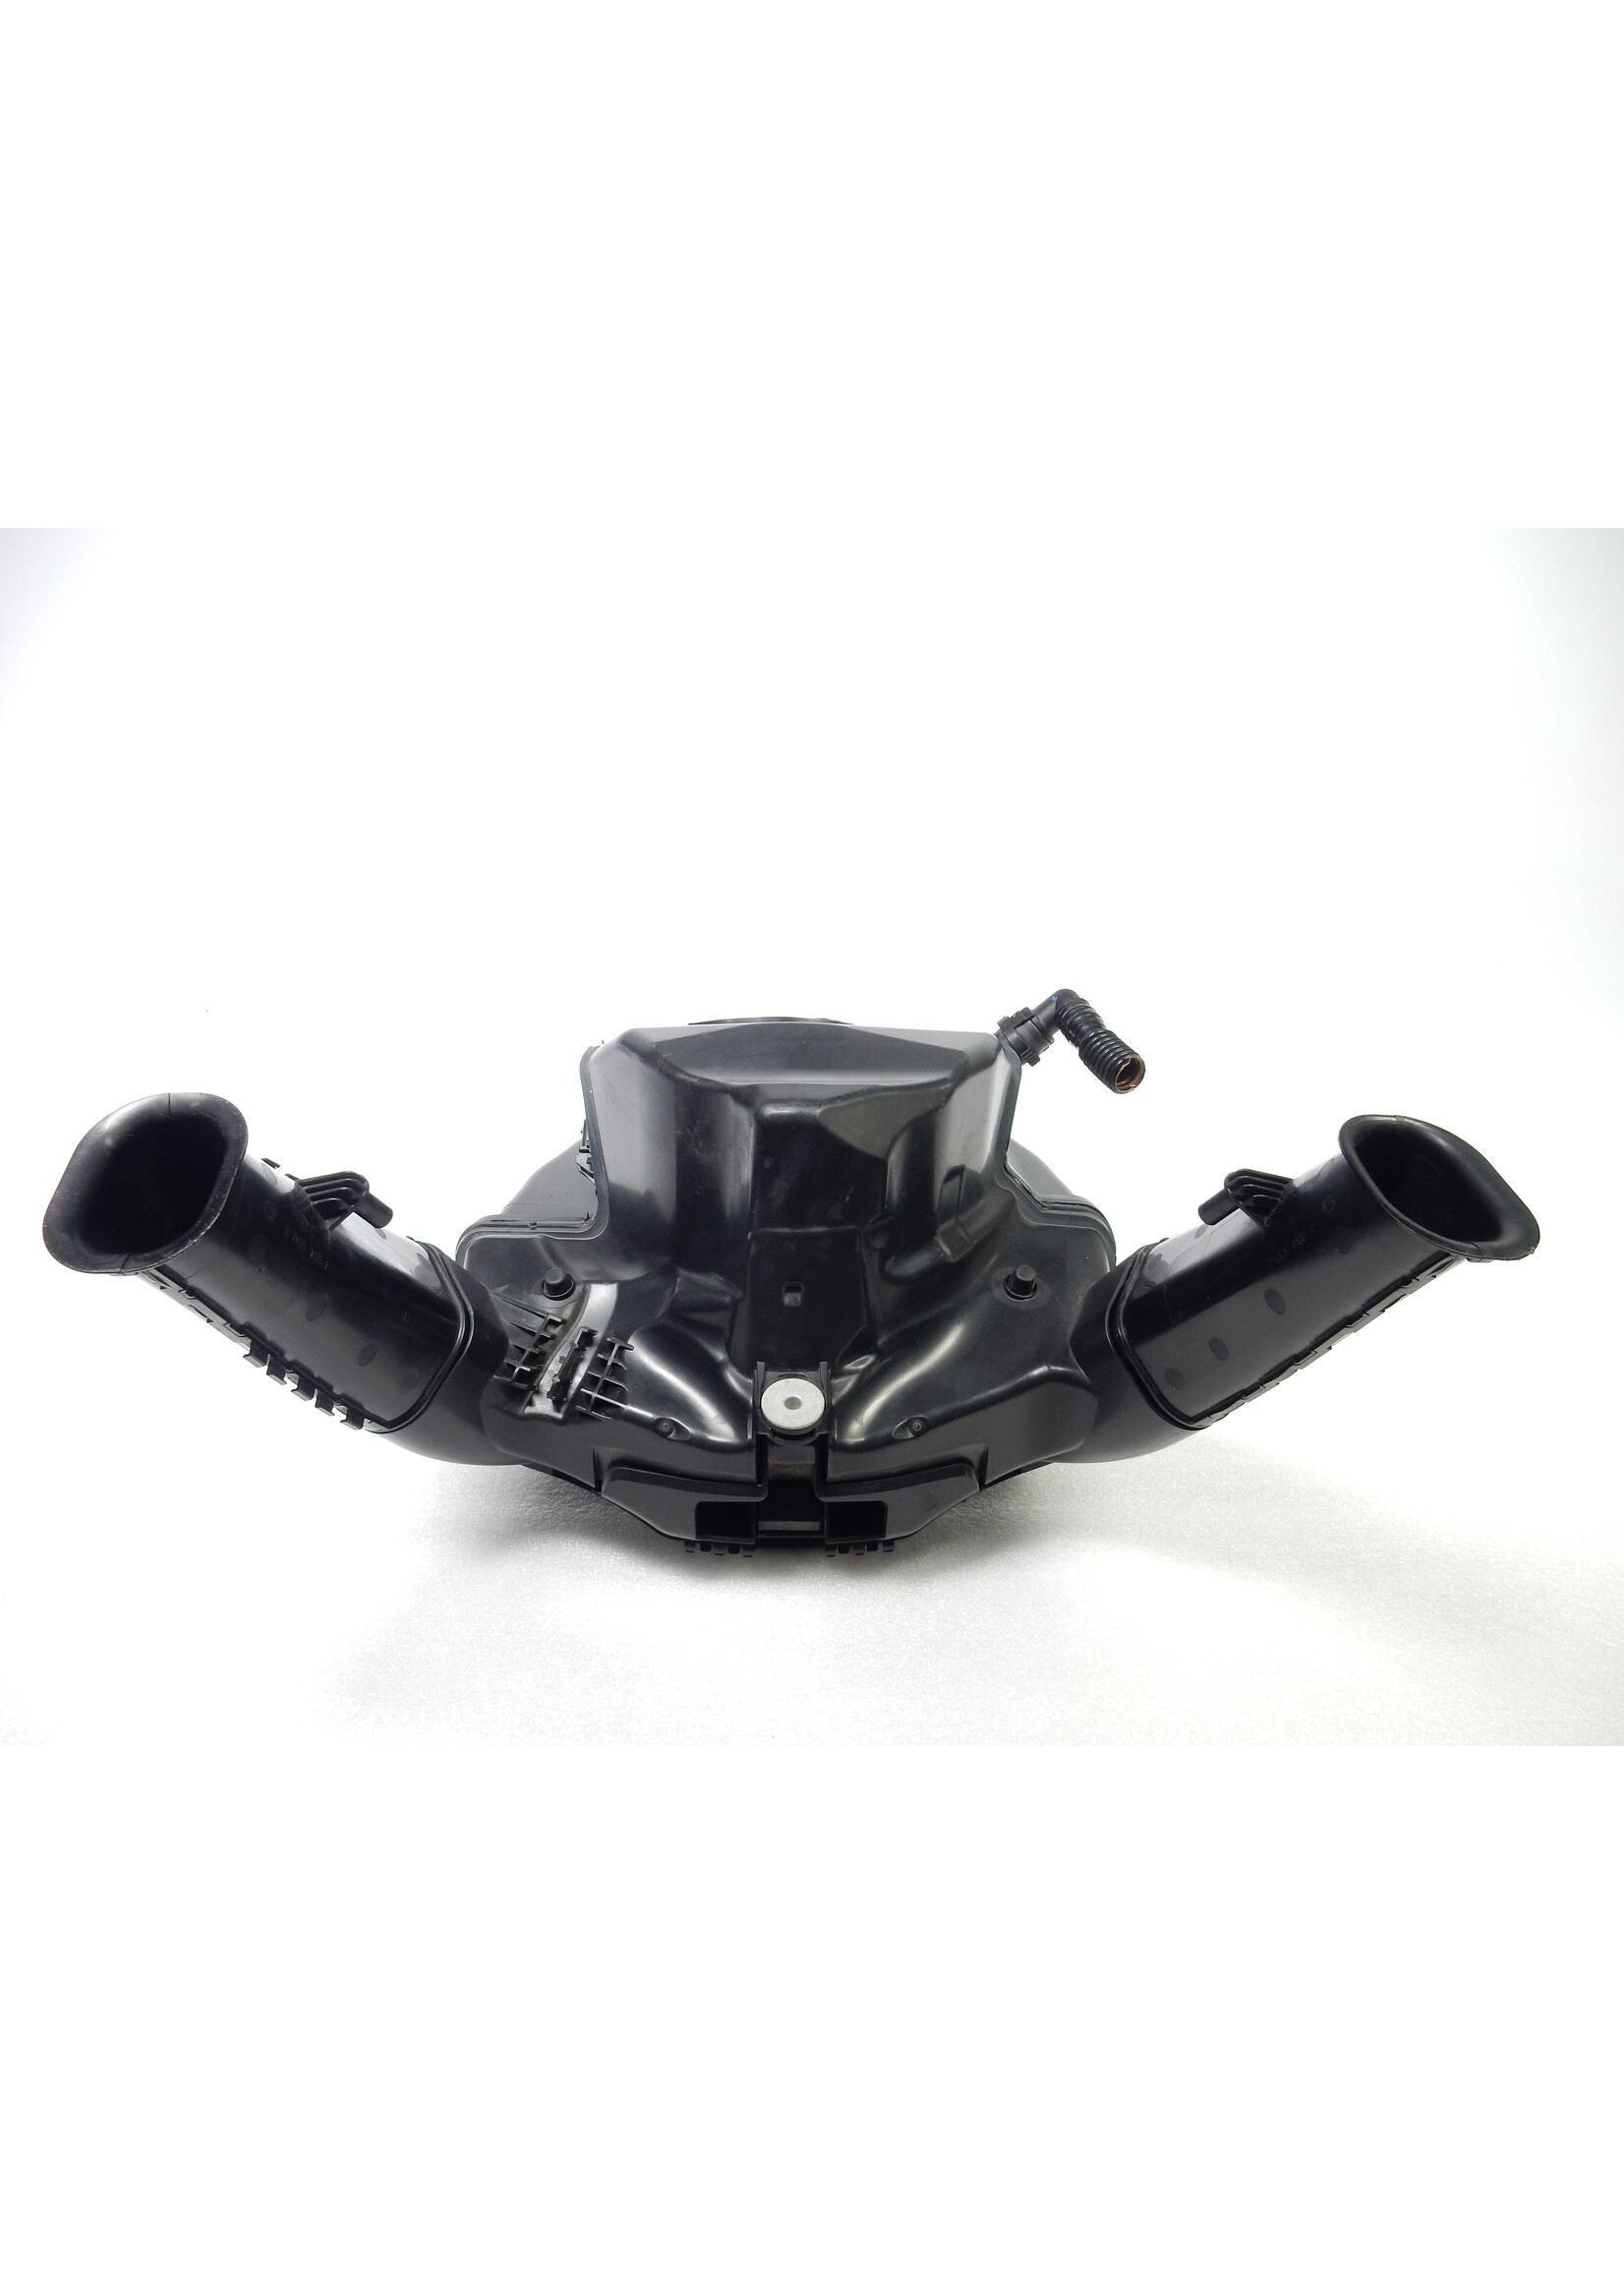 BMW BMW F 750 GS Intake silencer / Air cleaner / Intake snorkel, left / right / 13718558918 / 13728561572 / 13718558947 / 13718558948